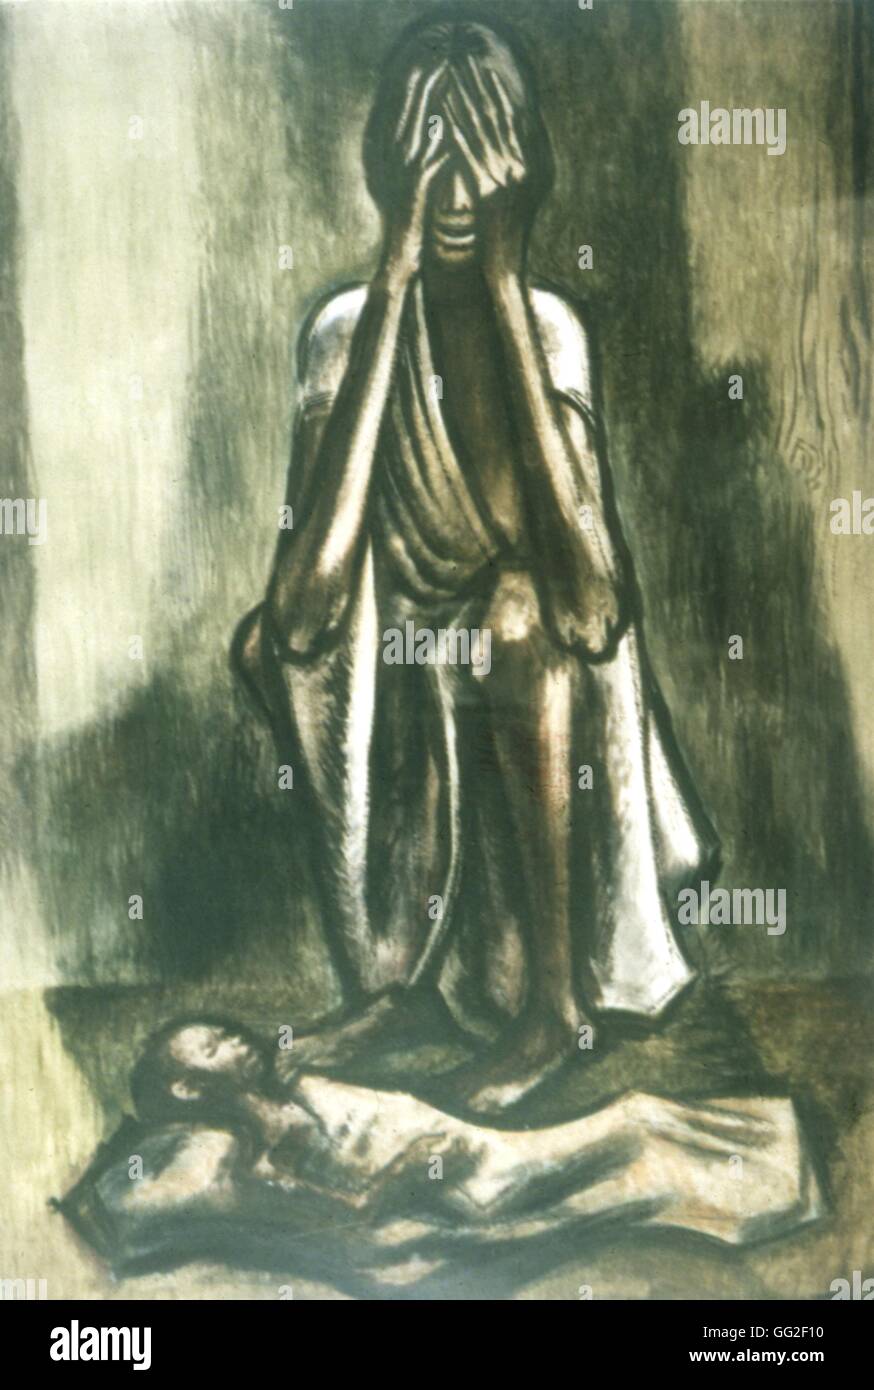 Painting by Millart Sheets. Starvation in India 1943 India U.S. Army Stock Photo